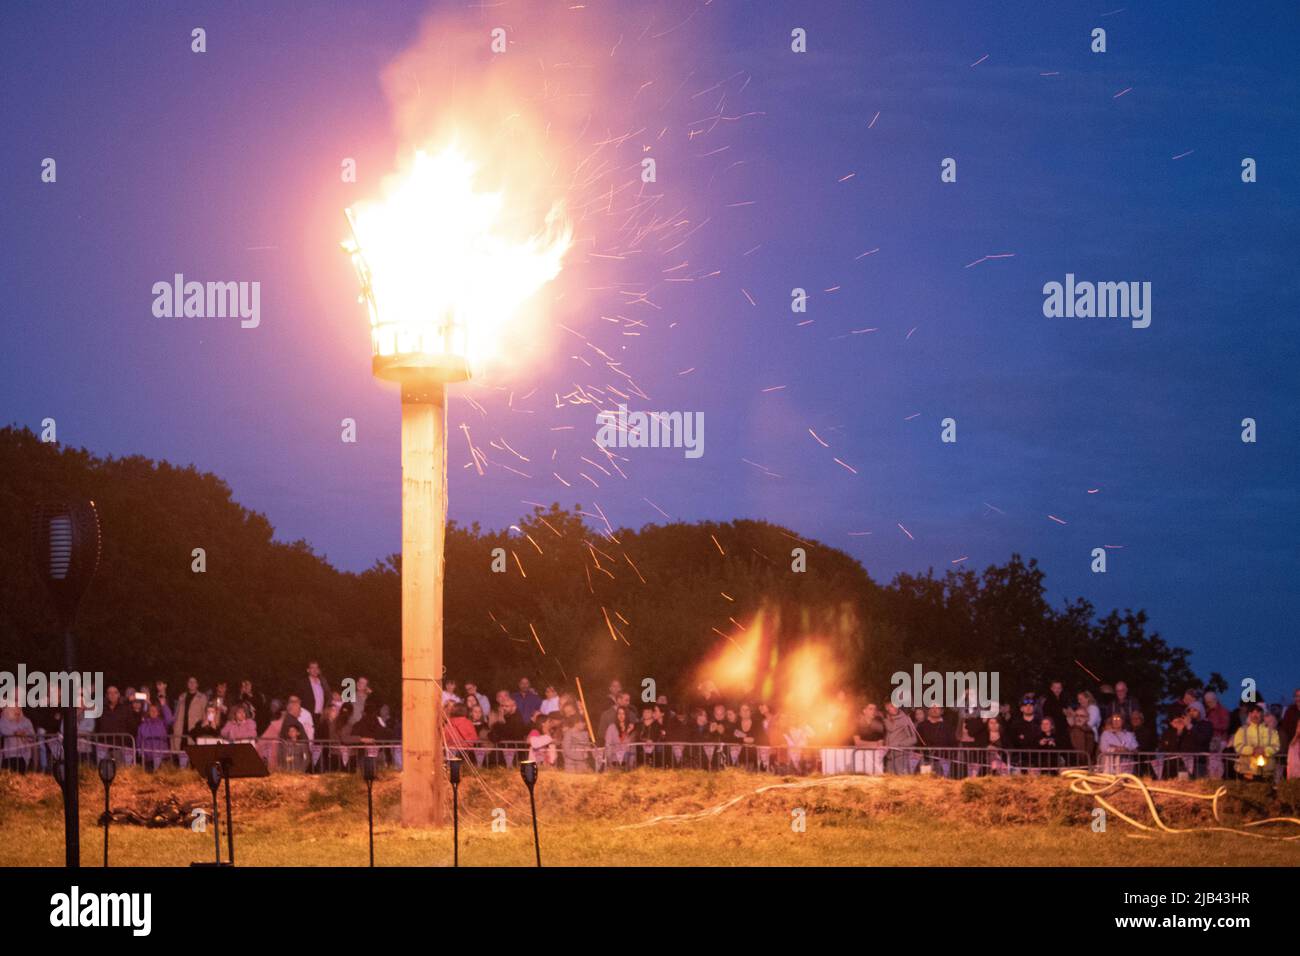 Epsom Downs, Surrey, UK. 2nd June, 2022. The Platinum Jubilee Beacon was lit at 9.45pm on Epsom Downs in Surrey, part of the celebrations for the 70 year reign of the British monarch Queen Elizabeth II. Credit: Julia Gavin/Alamy Live News Stock Photo